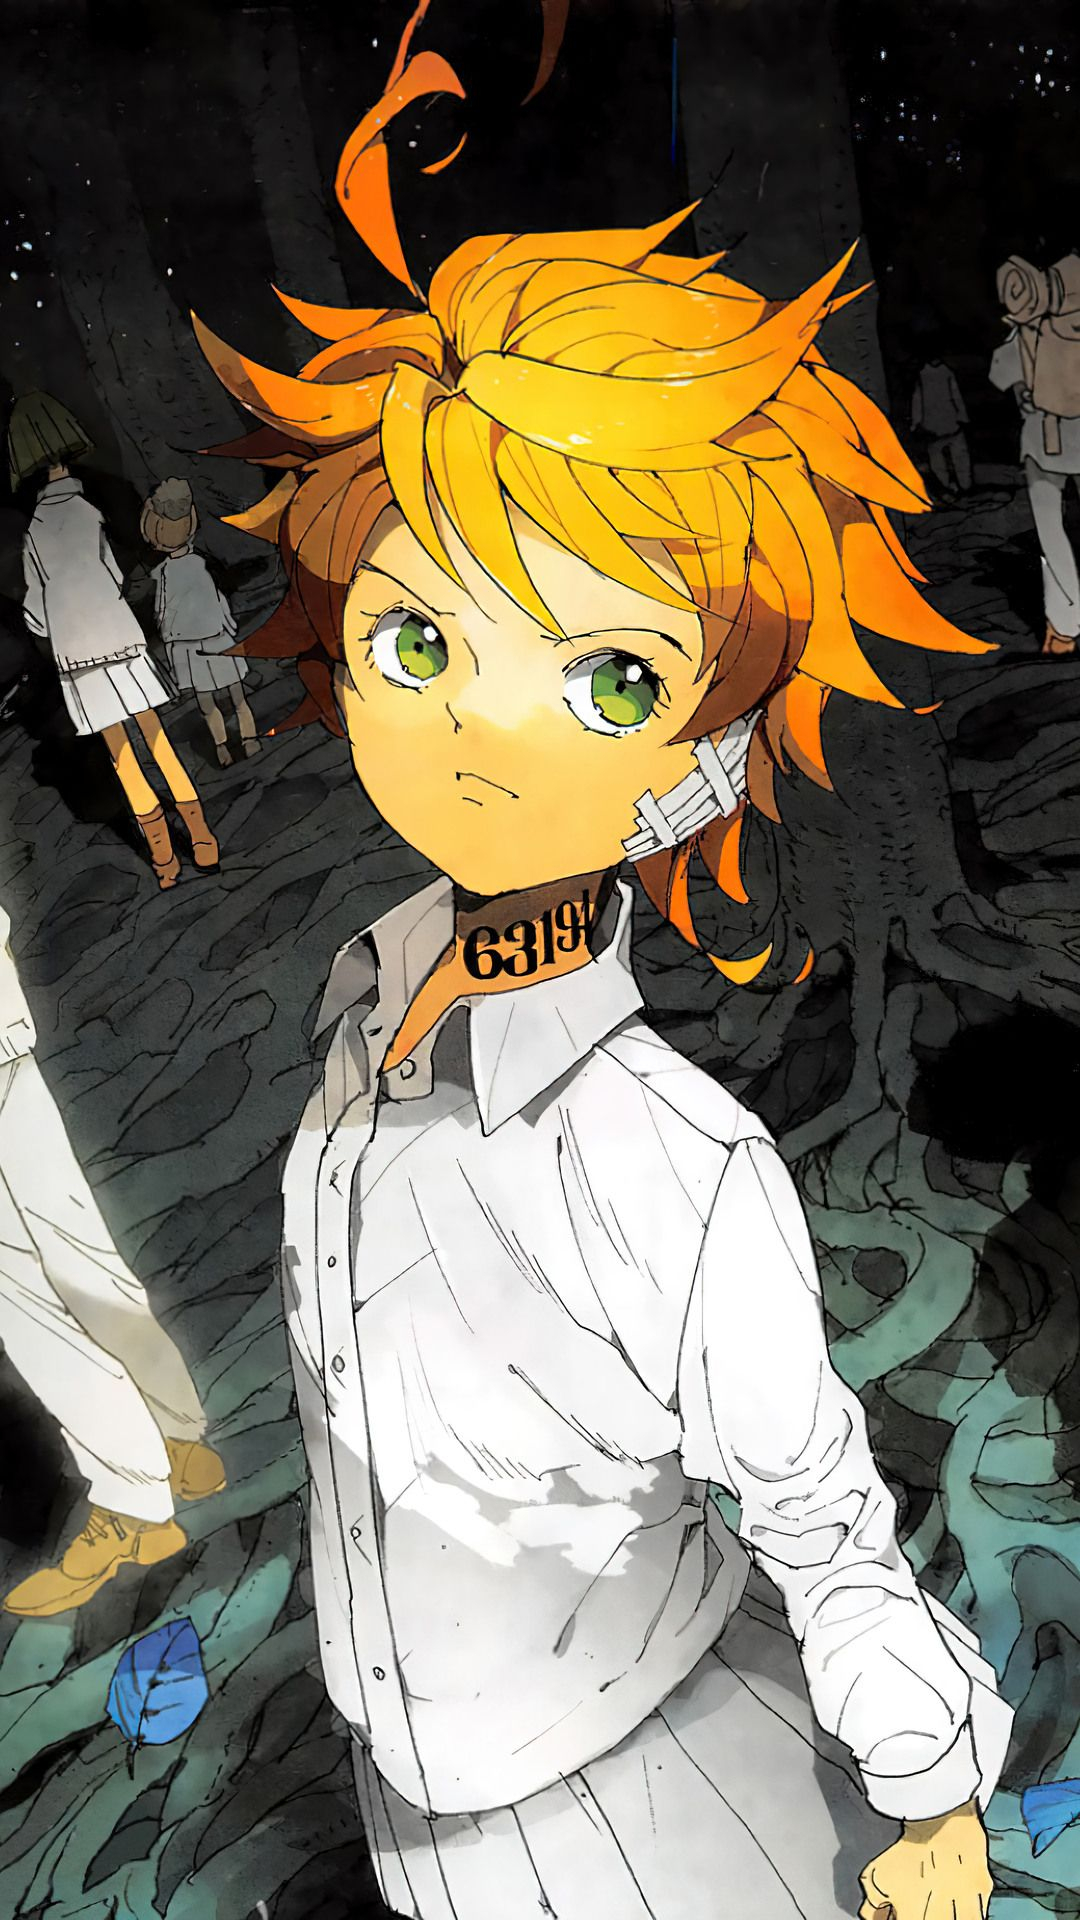 1080x1920 The Promised Neverland Wallpapers [Desktop,iPhone,Laptop,Android